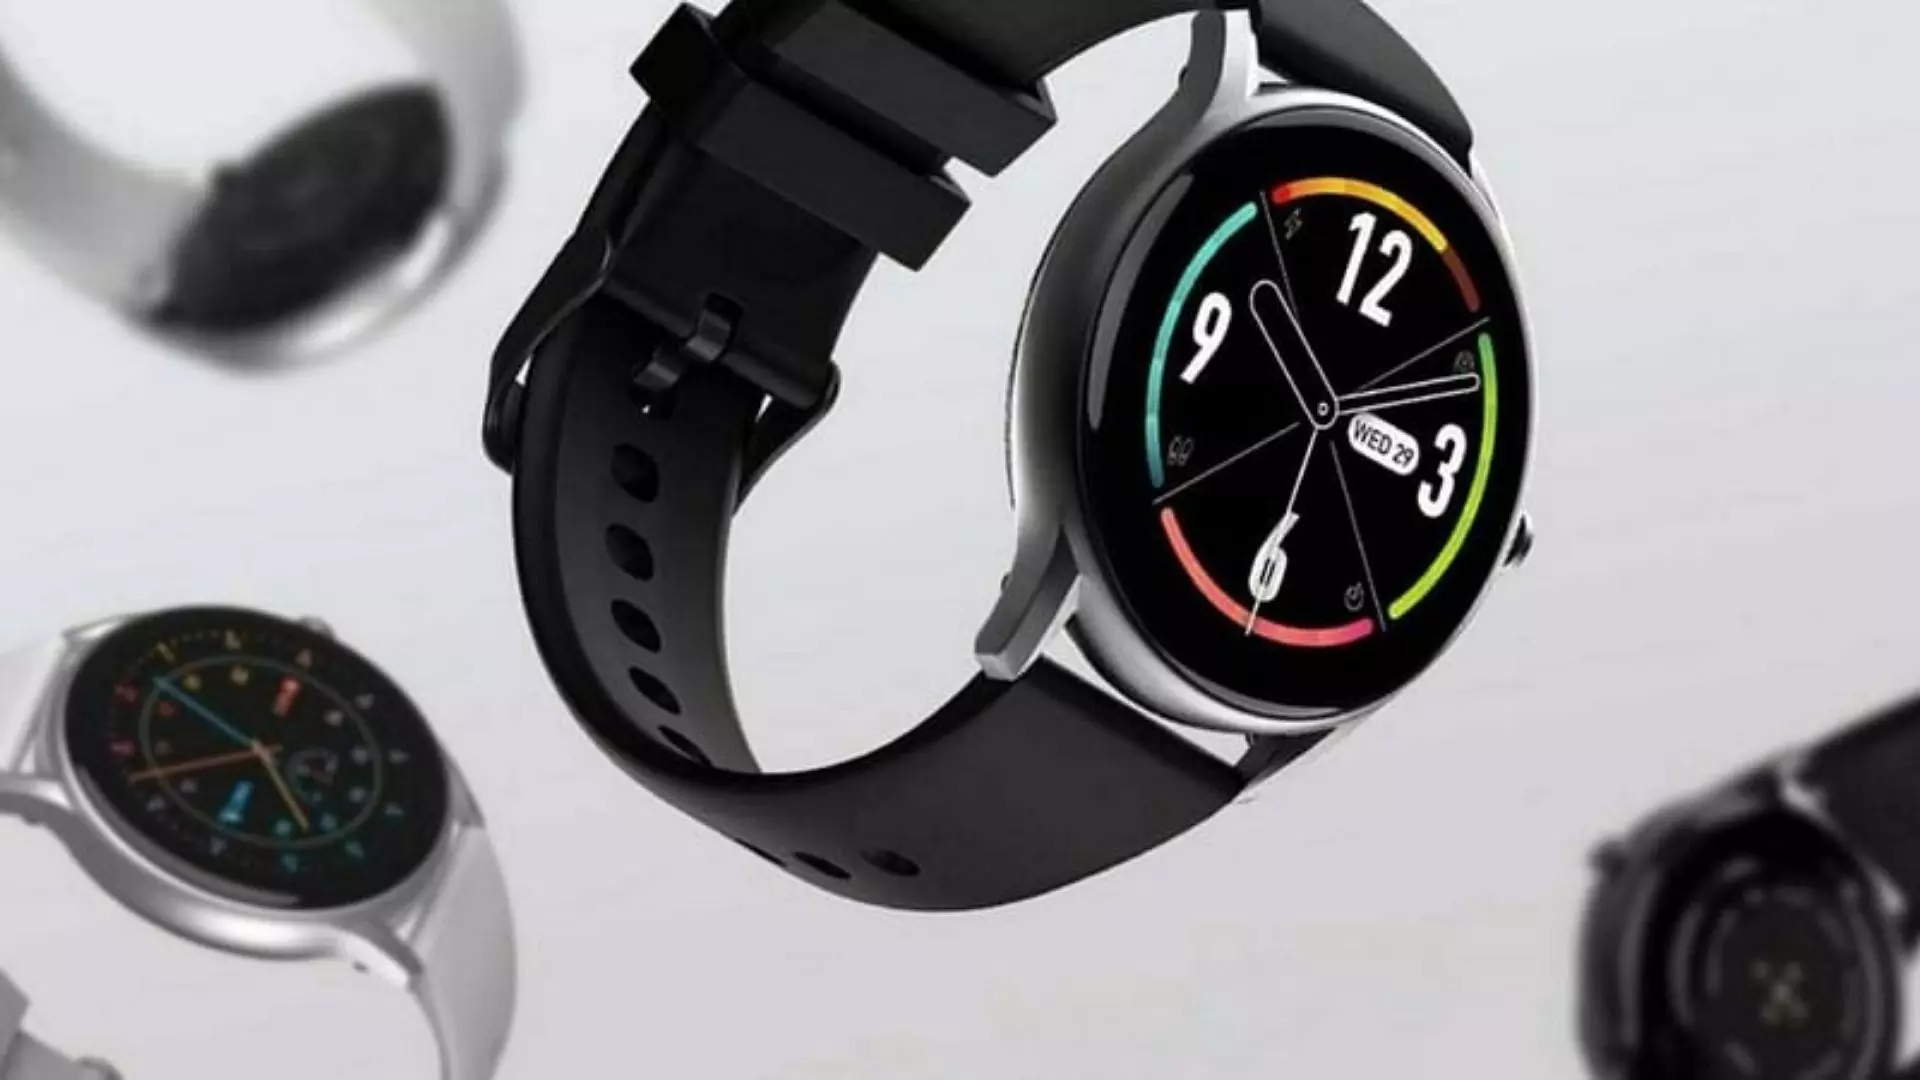 The noise latest smart watch with super features know about its features and price here